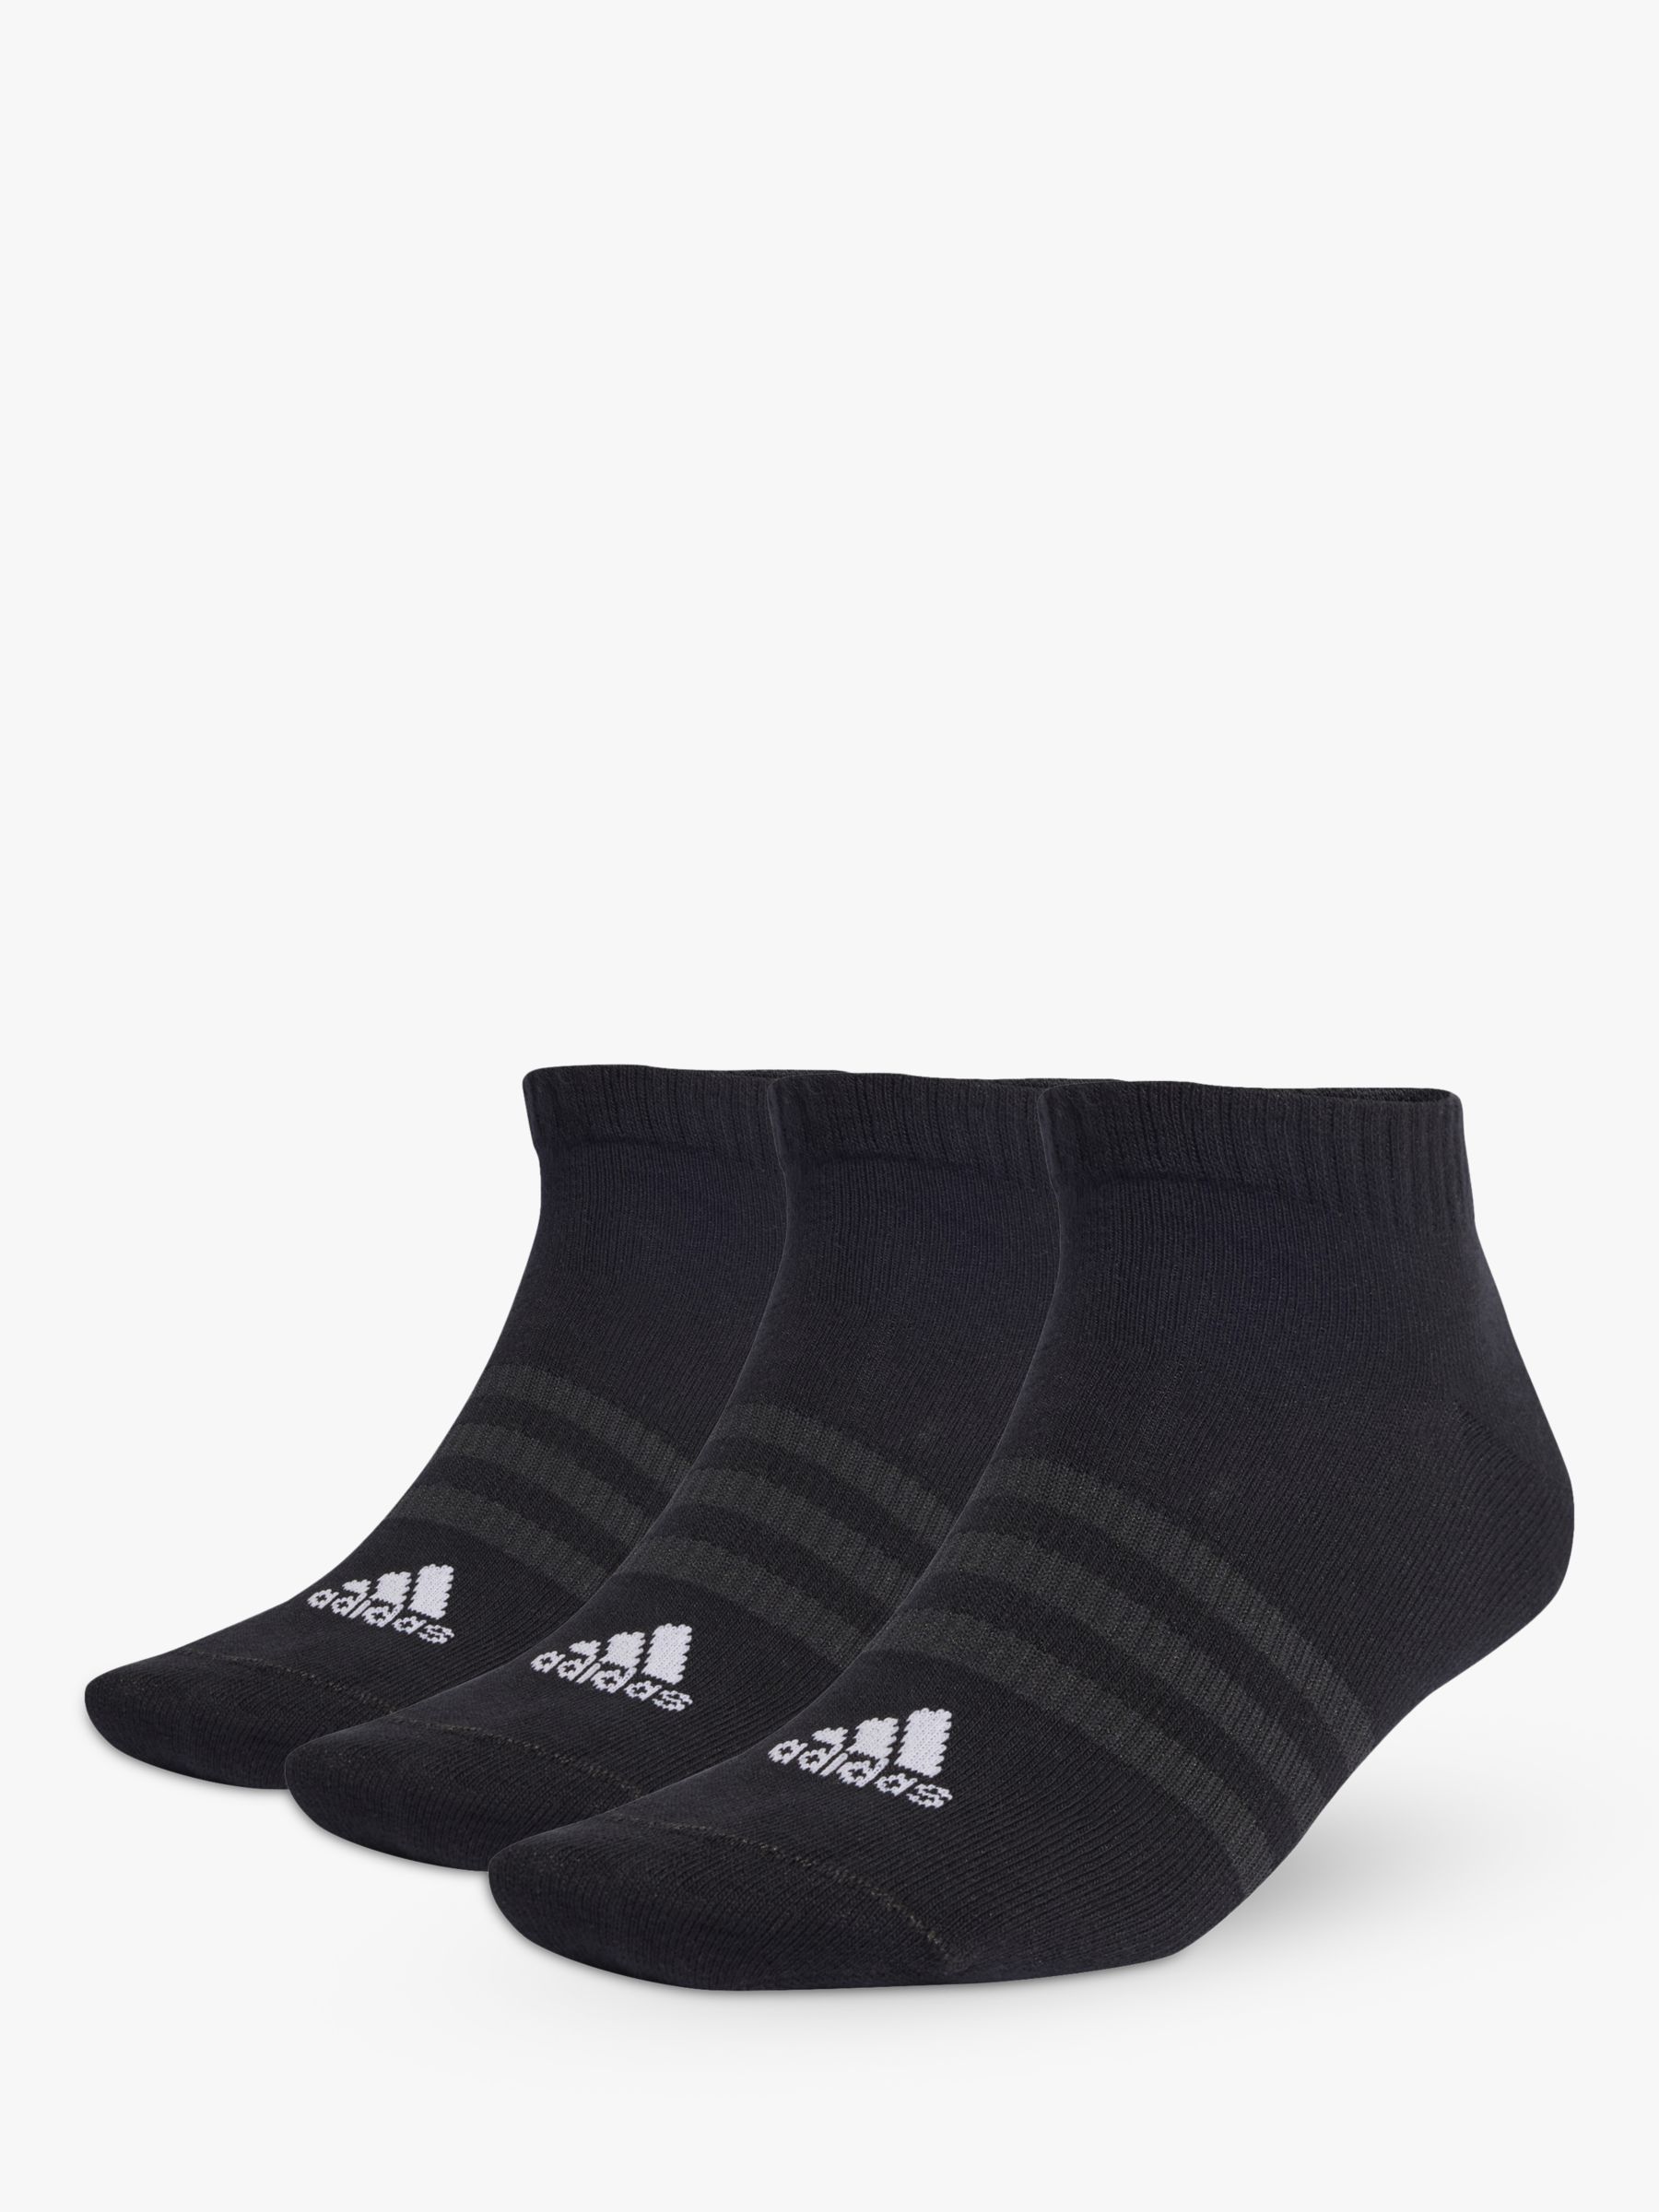 adidas Thin and Light Low-Cut Socks, Pack of 3, Black/White at John Lewis &  Partners